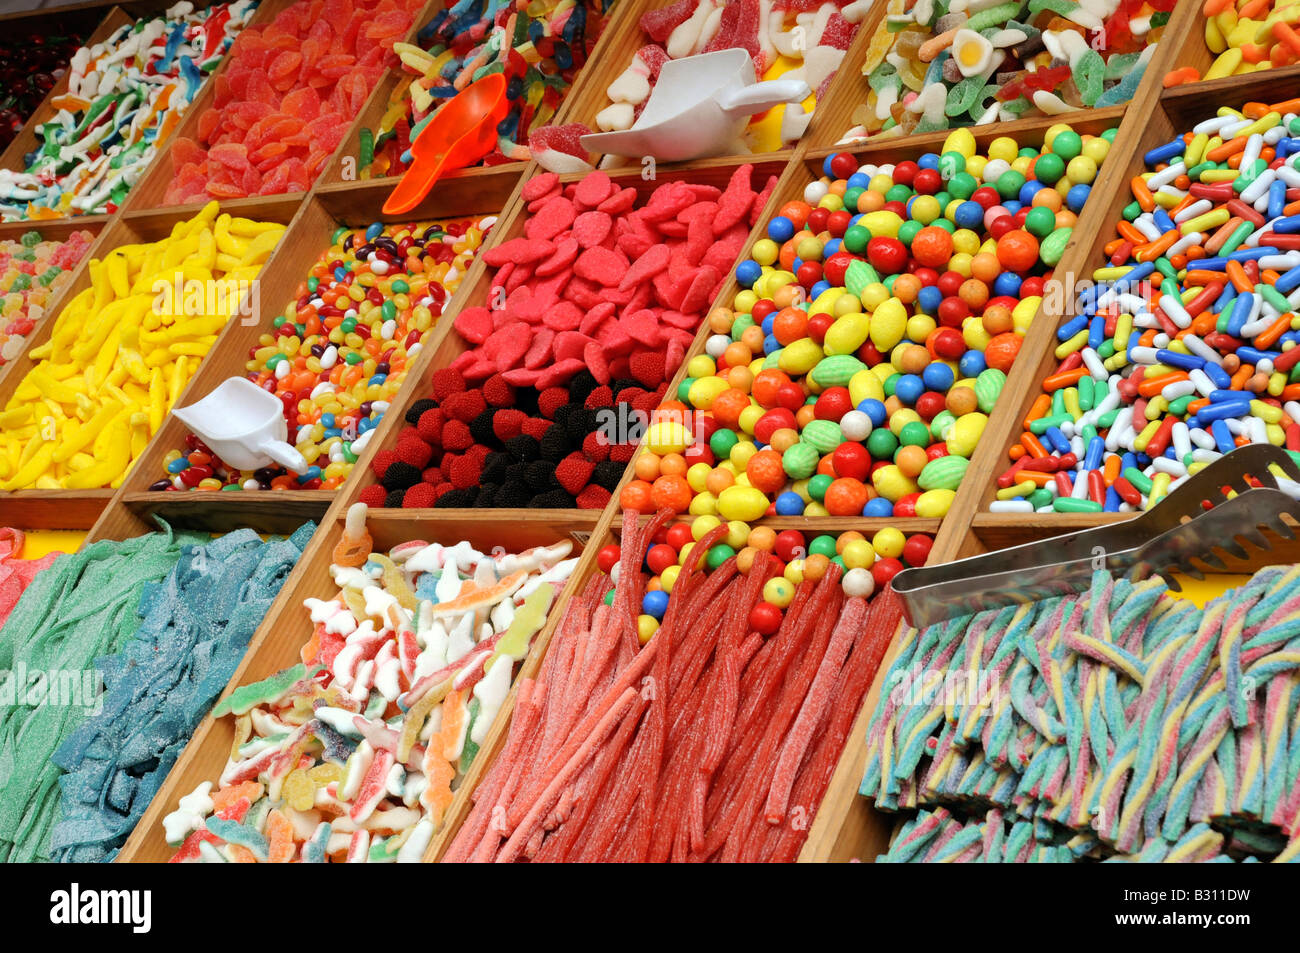 CANDY SWEET STALL Stock Photo